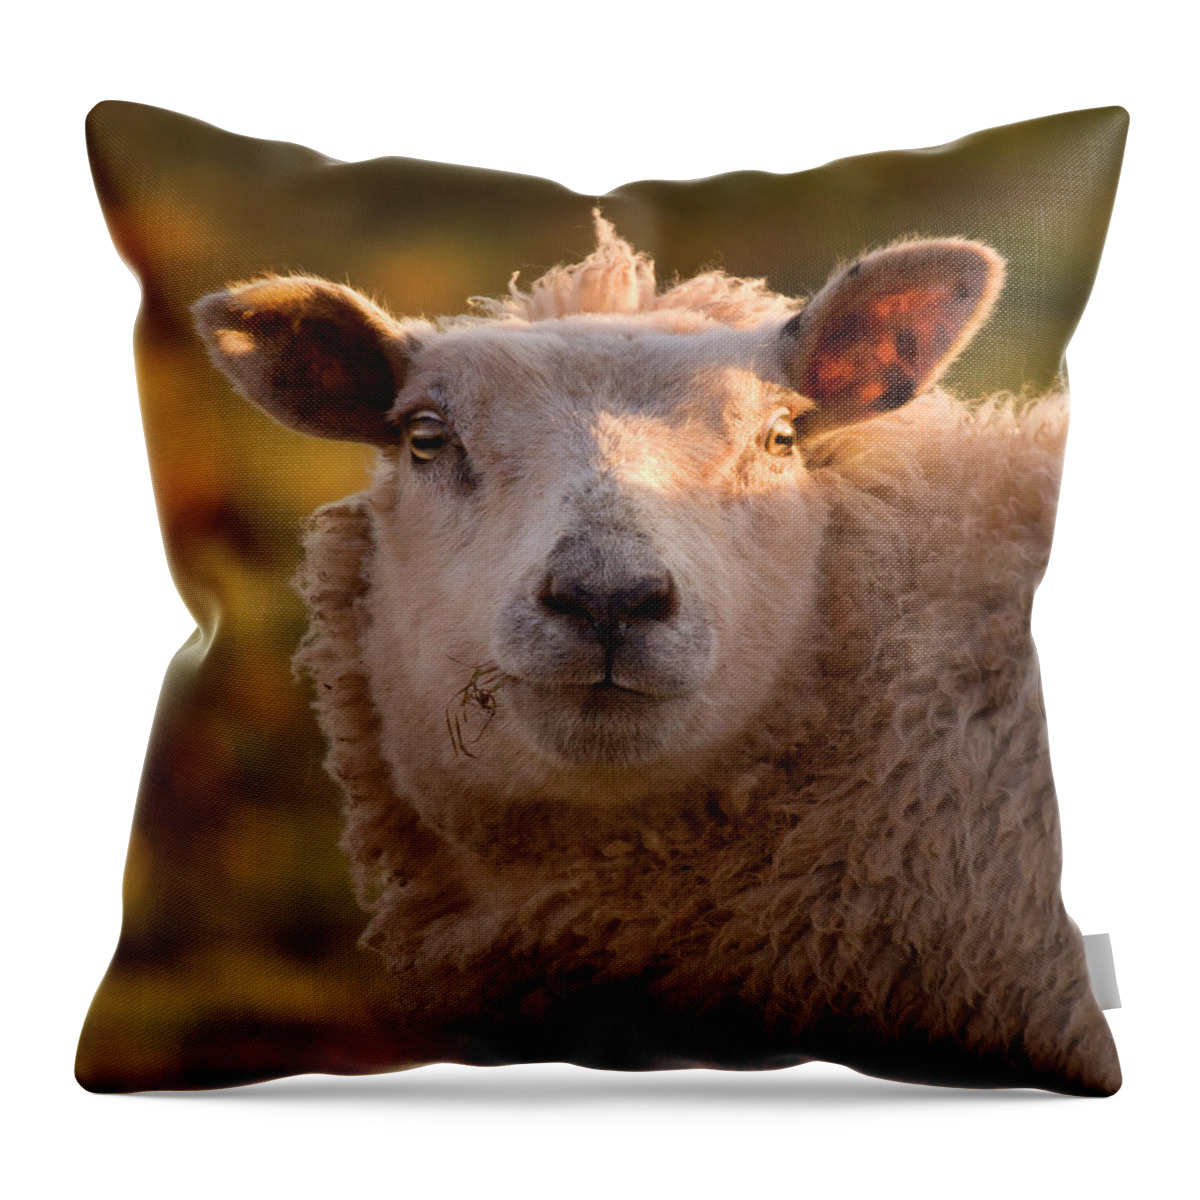 Sheep Throw Pillow featuring the photograph Silly Face by Ang El